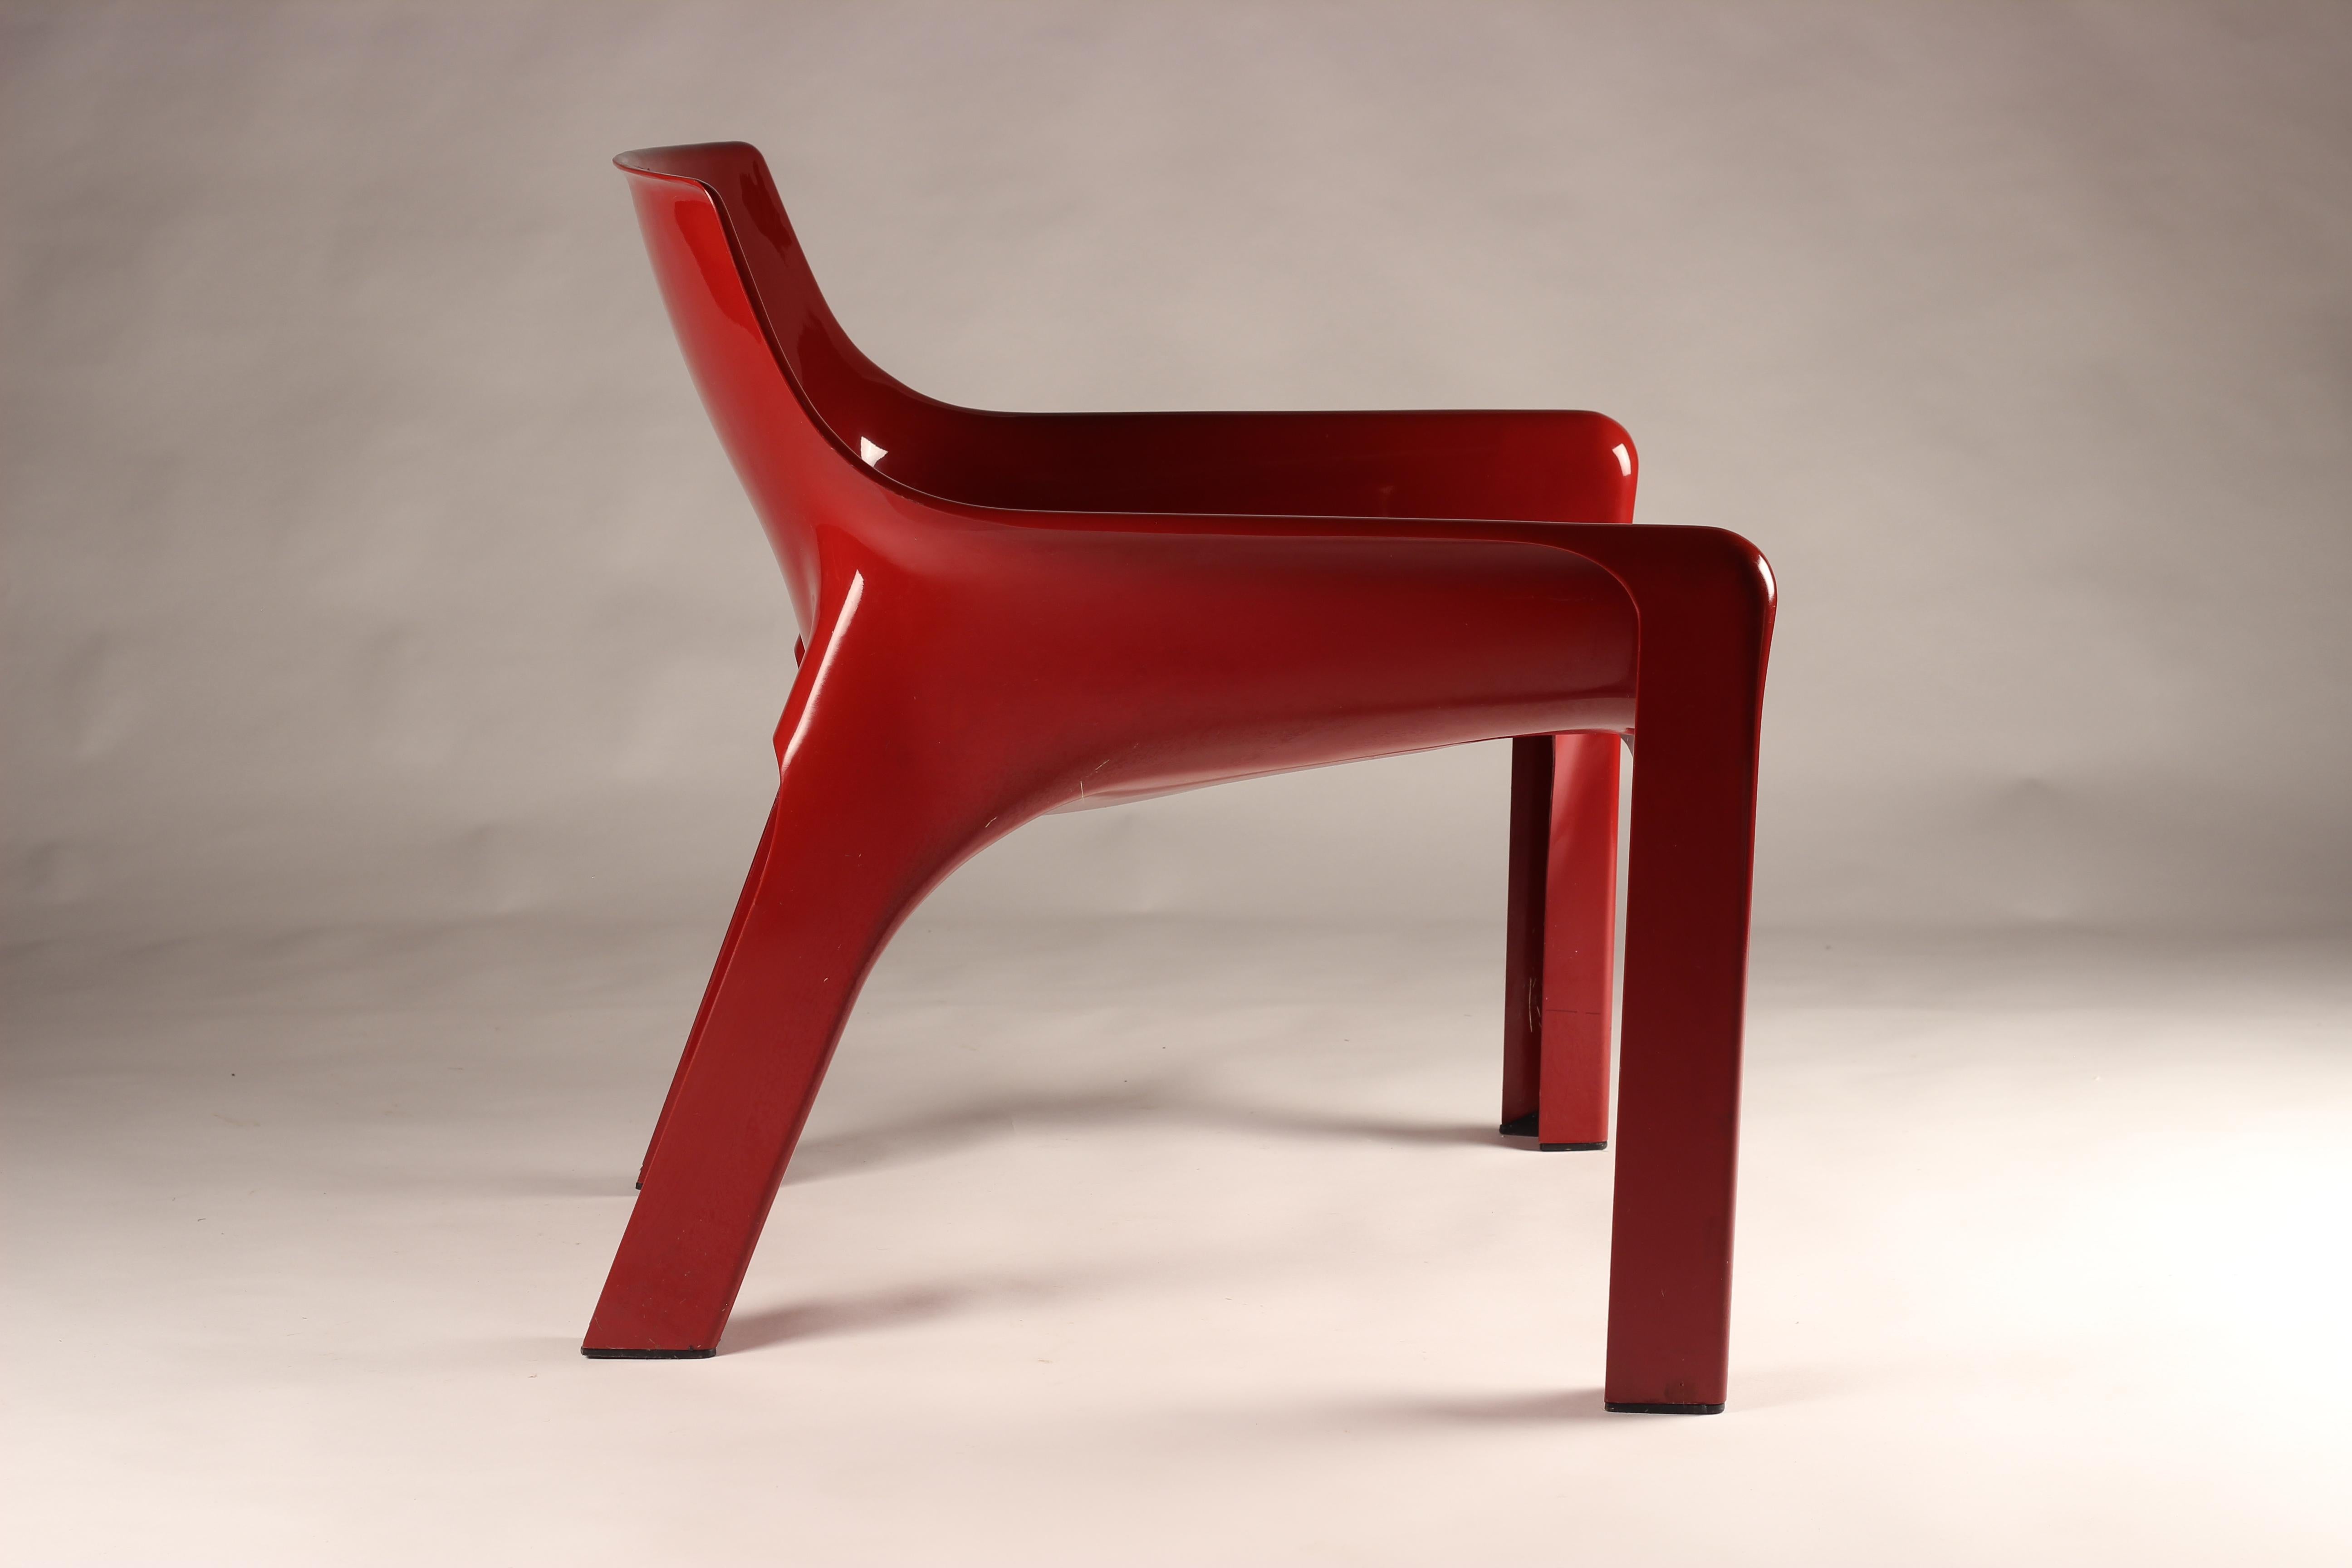 Molded Pair of Red Vicario Lounge Chairs Design by Vico Magistretti Made by Artemide